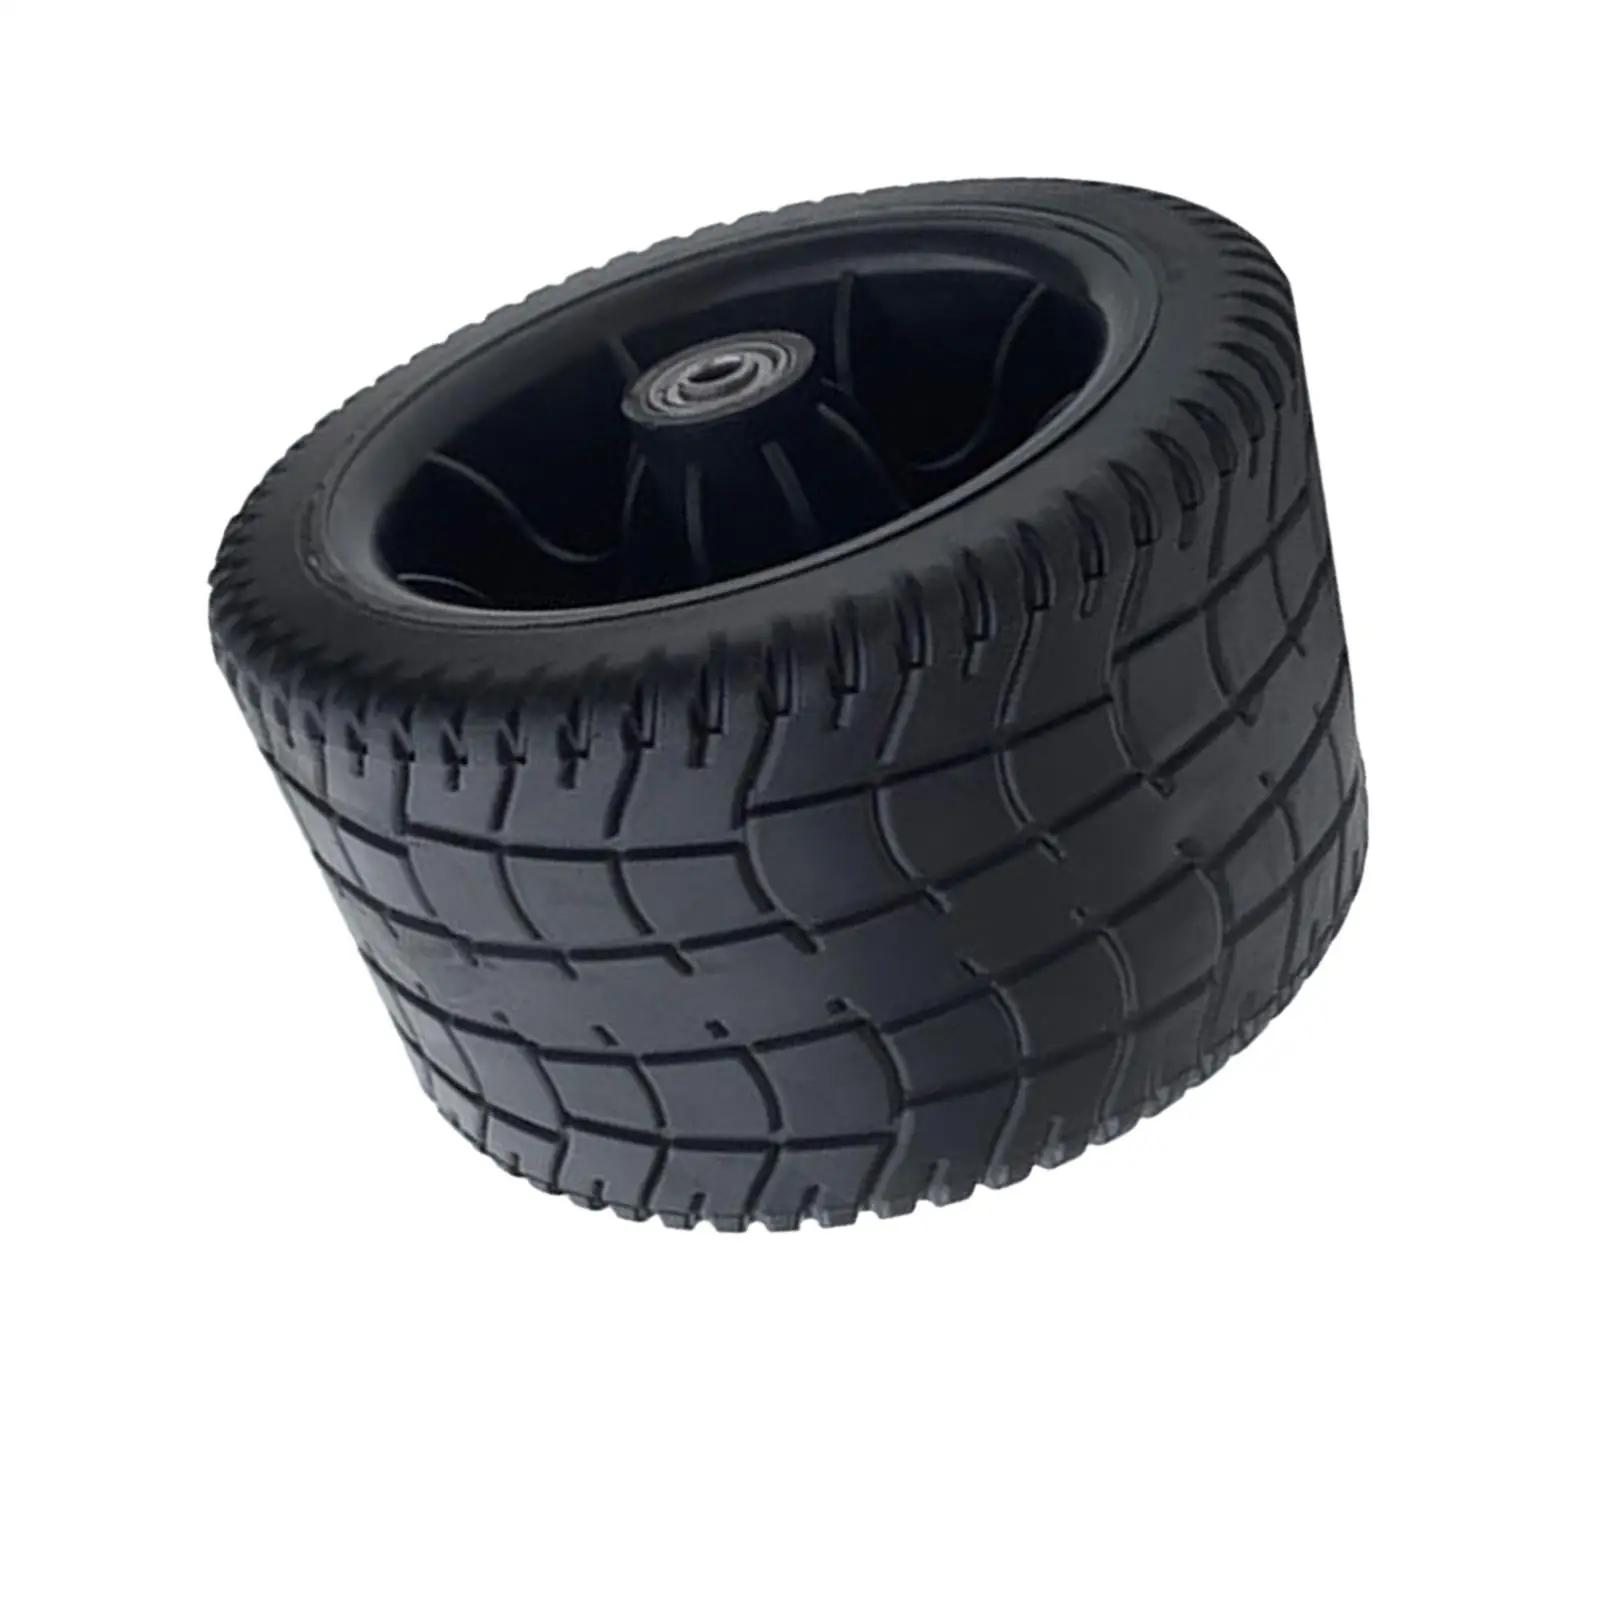 4inch Wide Wagon Cart Wheel PP Tires Black Easily Install Sturdy Practical